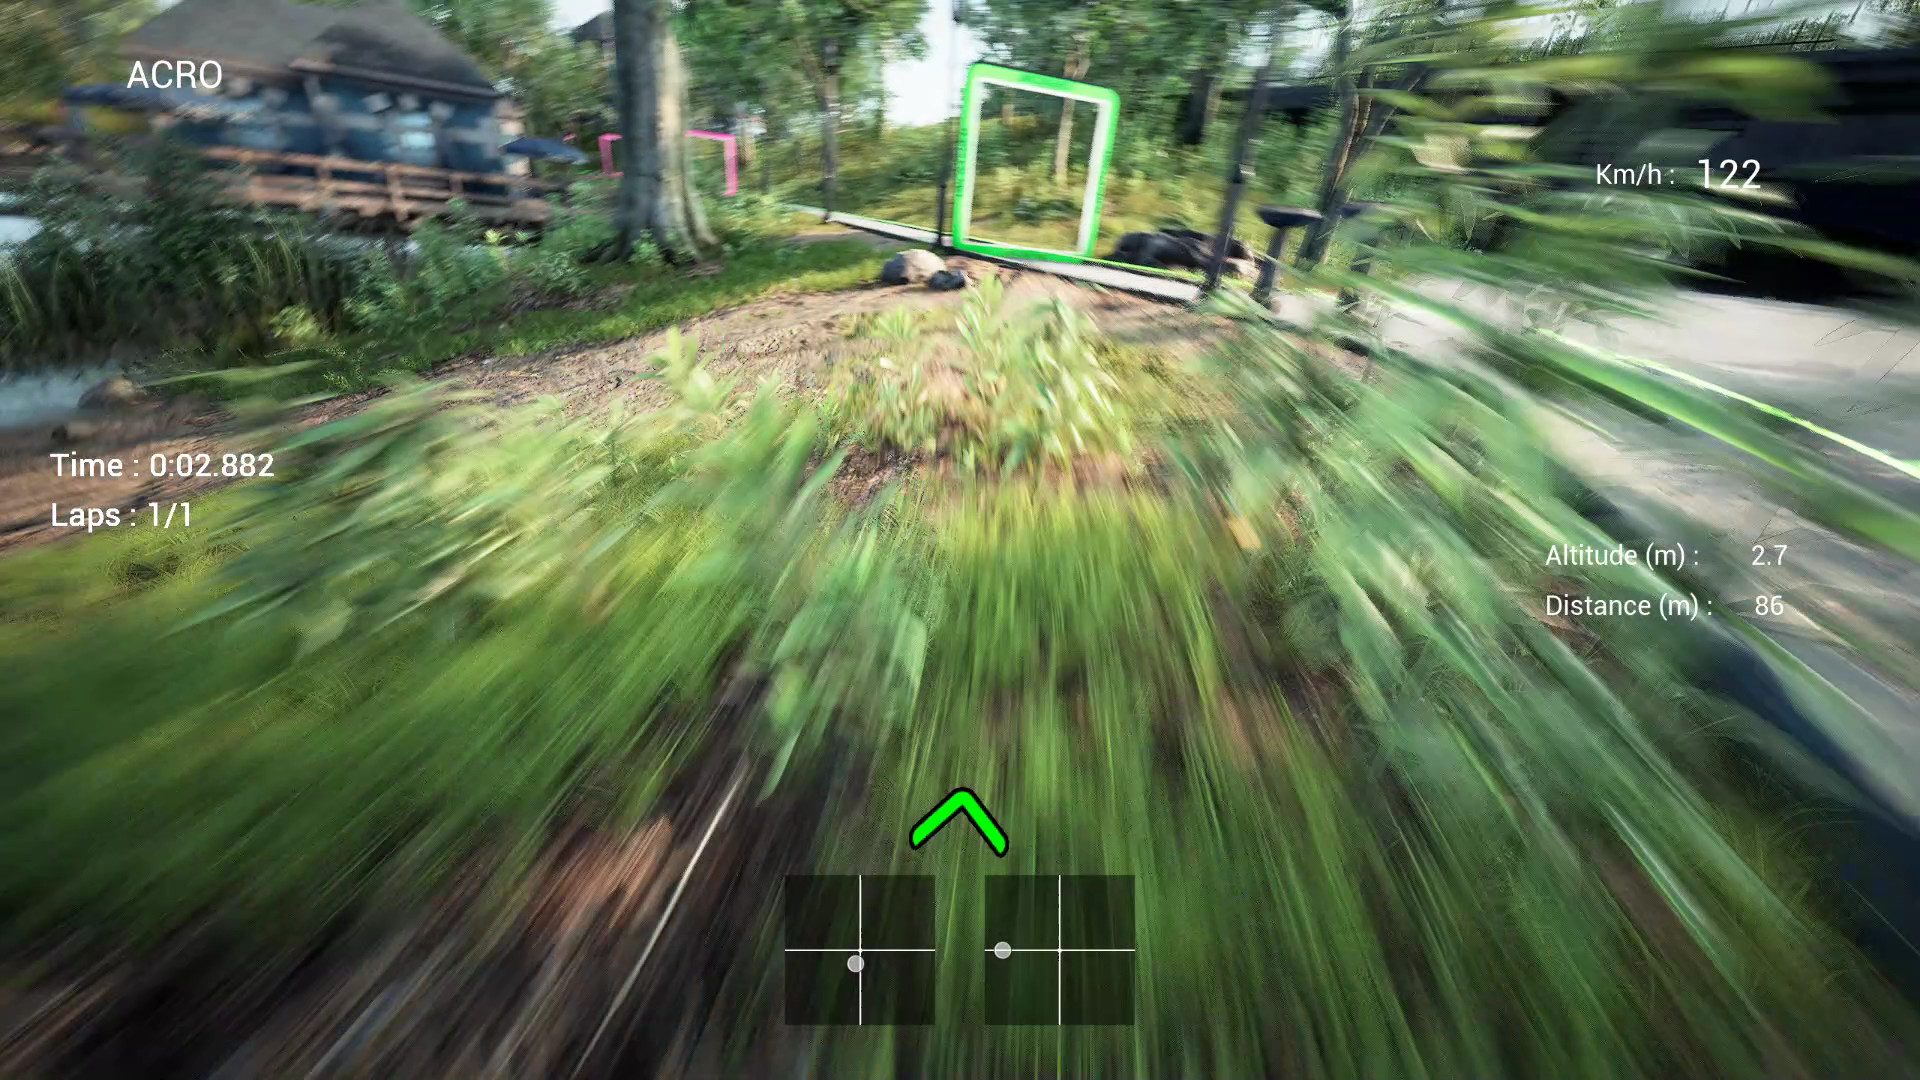 Uncrashed : FPV Drone Simulator on Steam